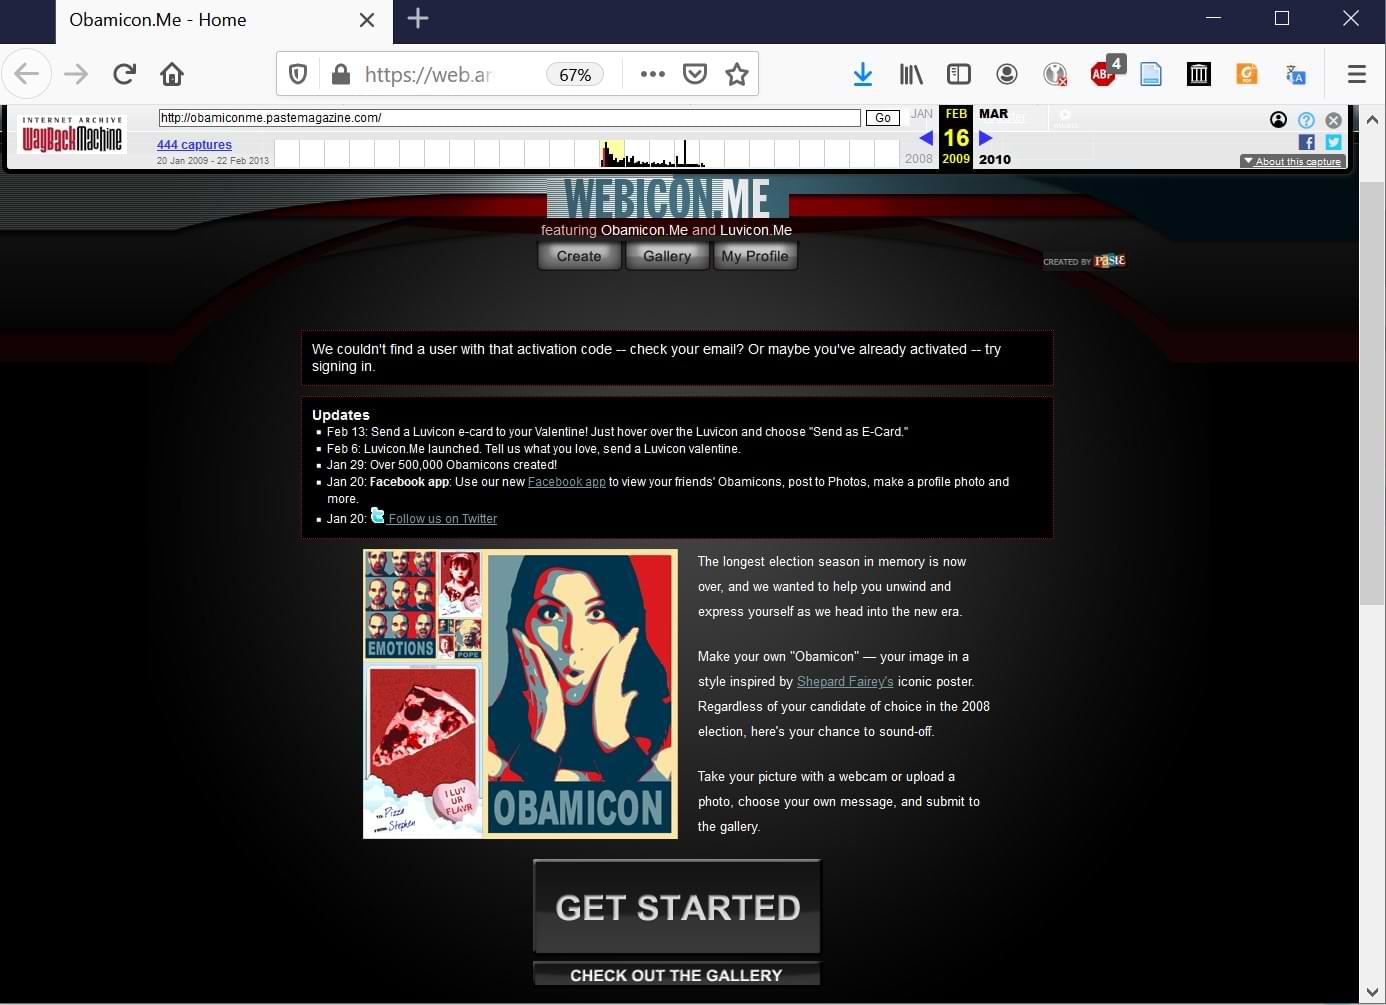 A screenshot of the Obamicon.Me homepage from 16 February 2009, featuring a list of updates, including the launch of the Luvicon.Me electronic valentine generator on 6 February 2009.